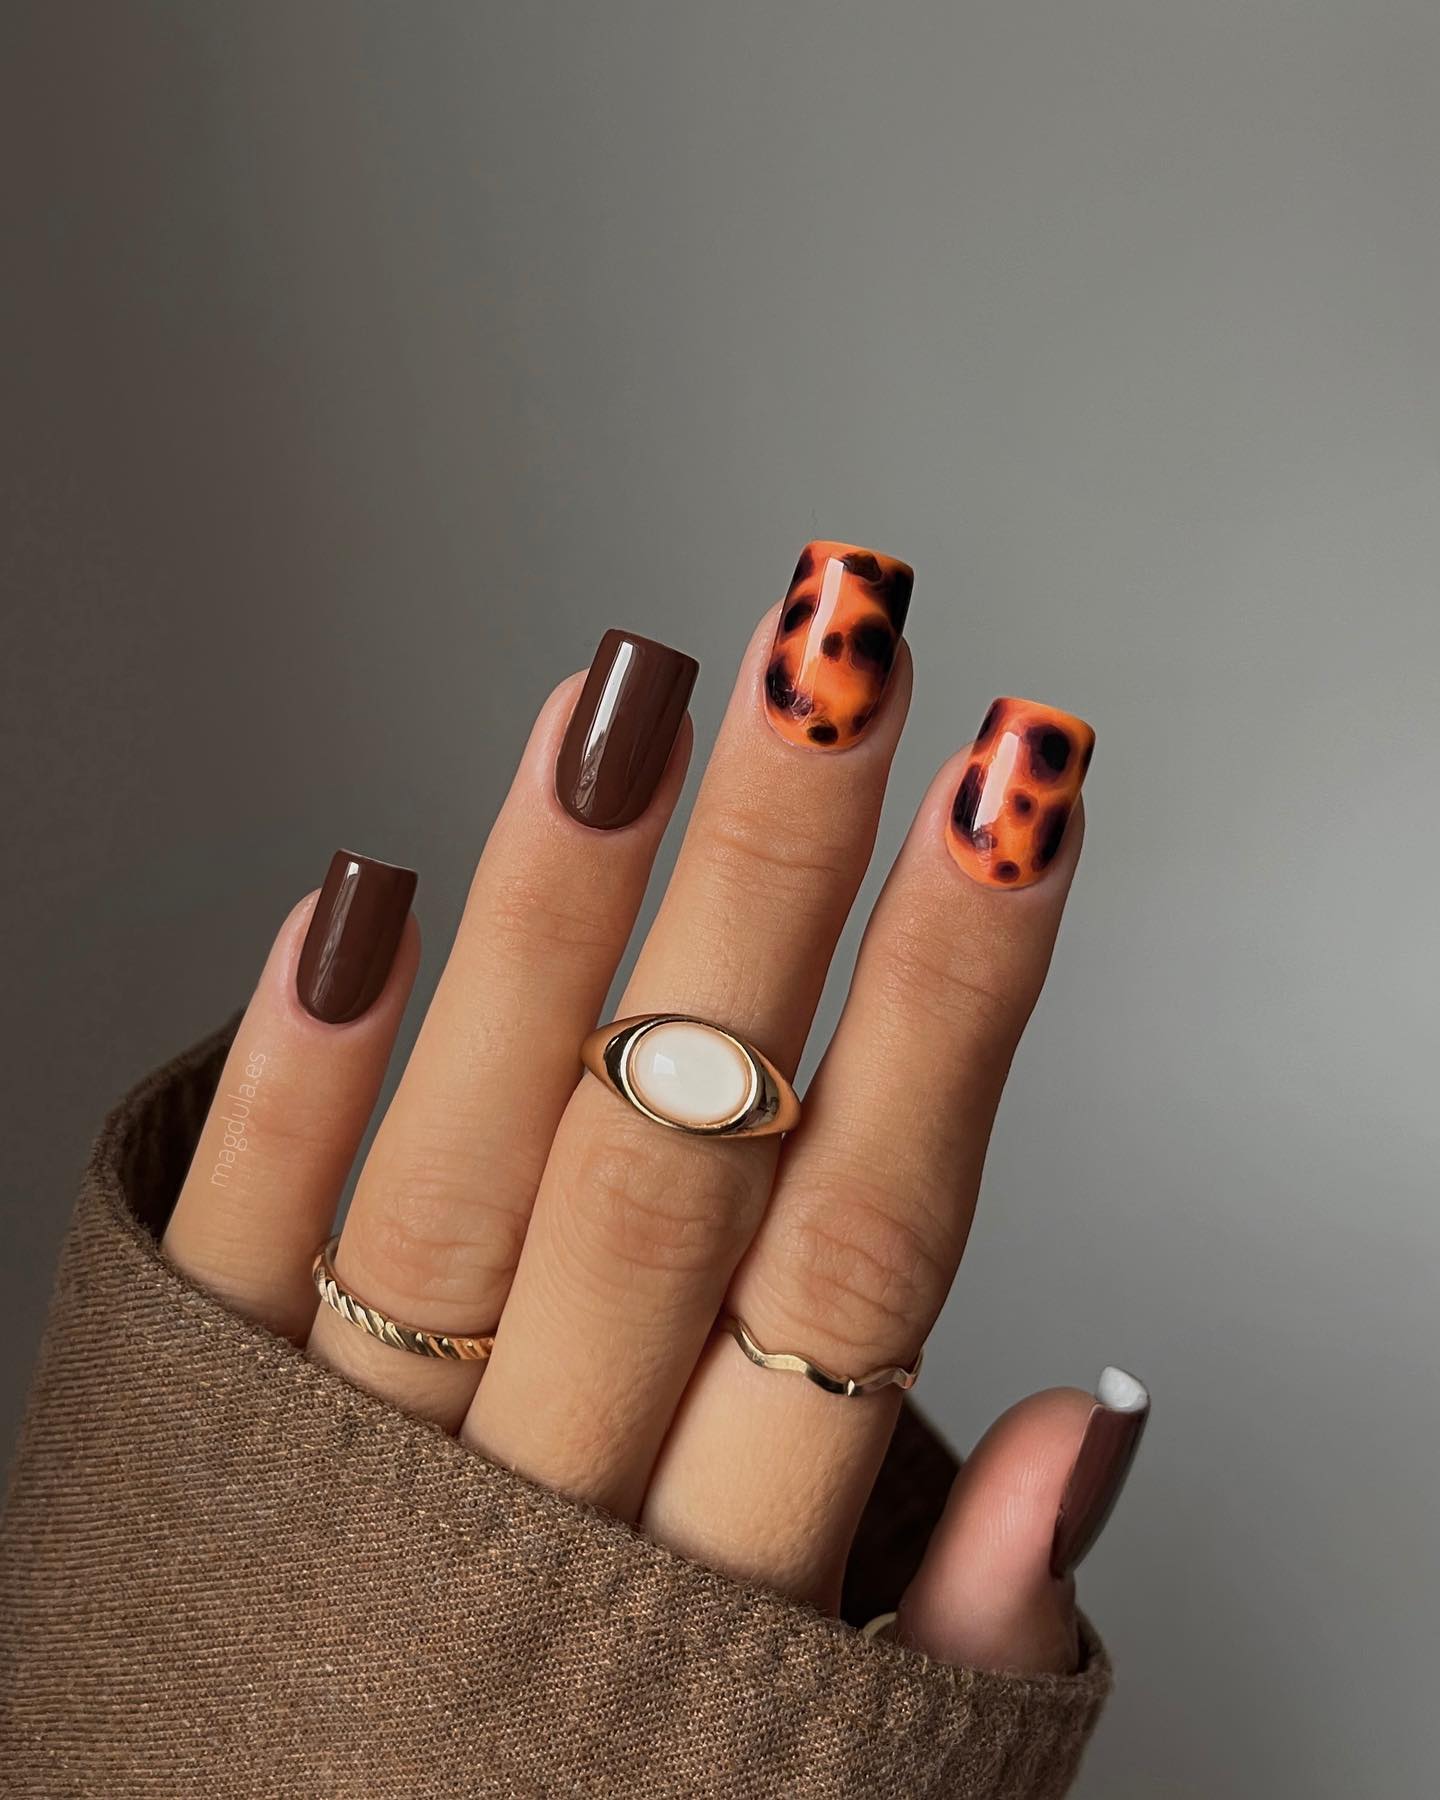 This animal print nail art is super fun. Can you spot how brown really pops against the orange? Your square mani will stand out with this nail art and we have to say that it's perfect for autumn!